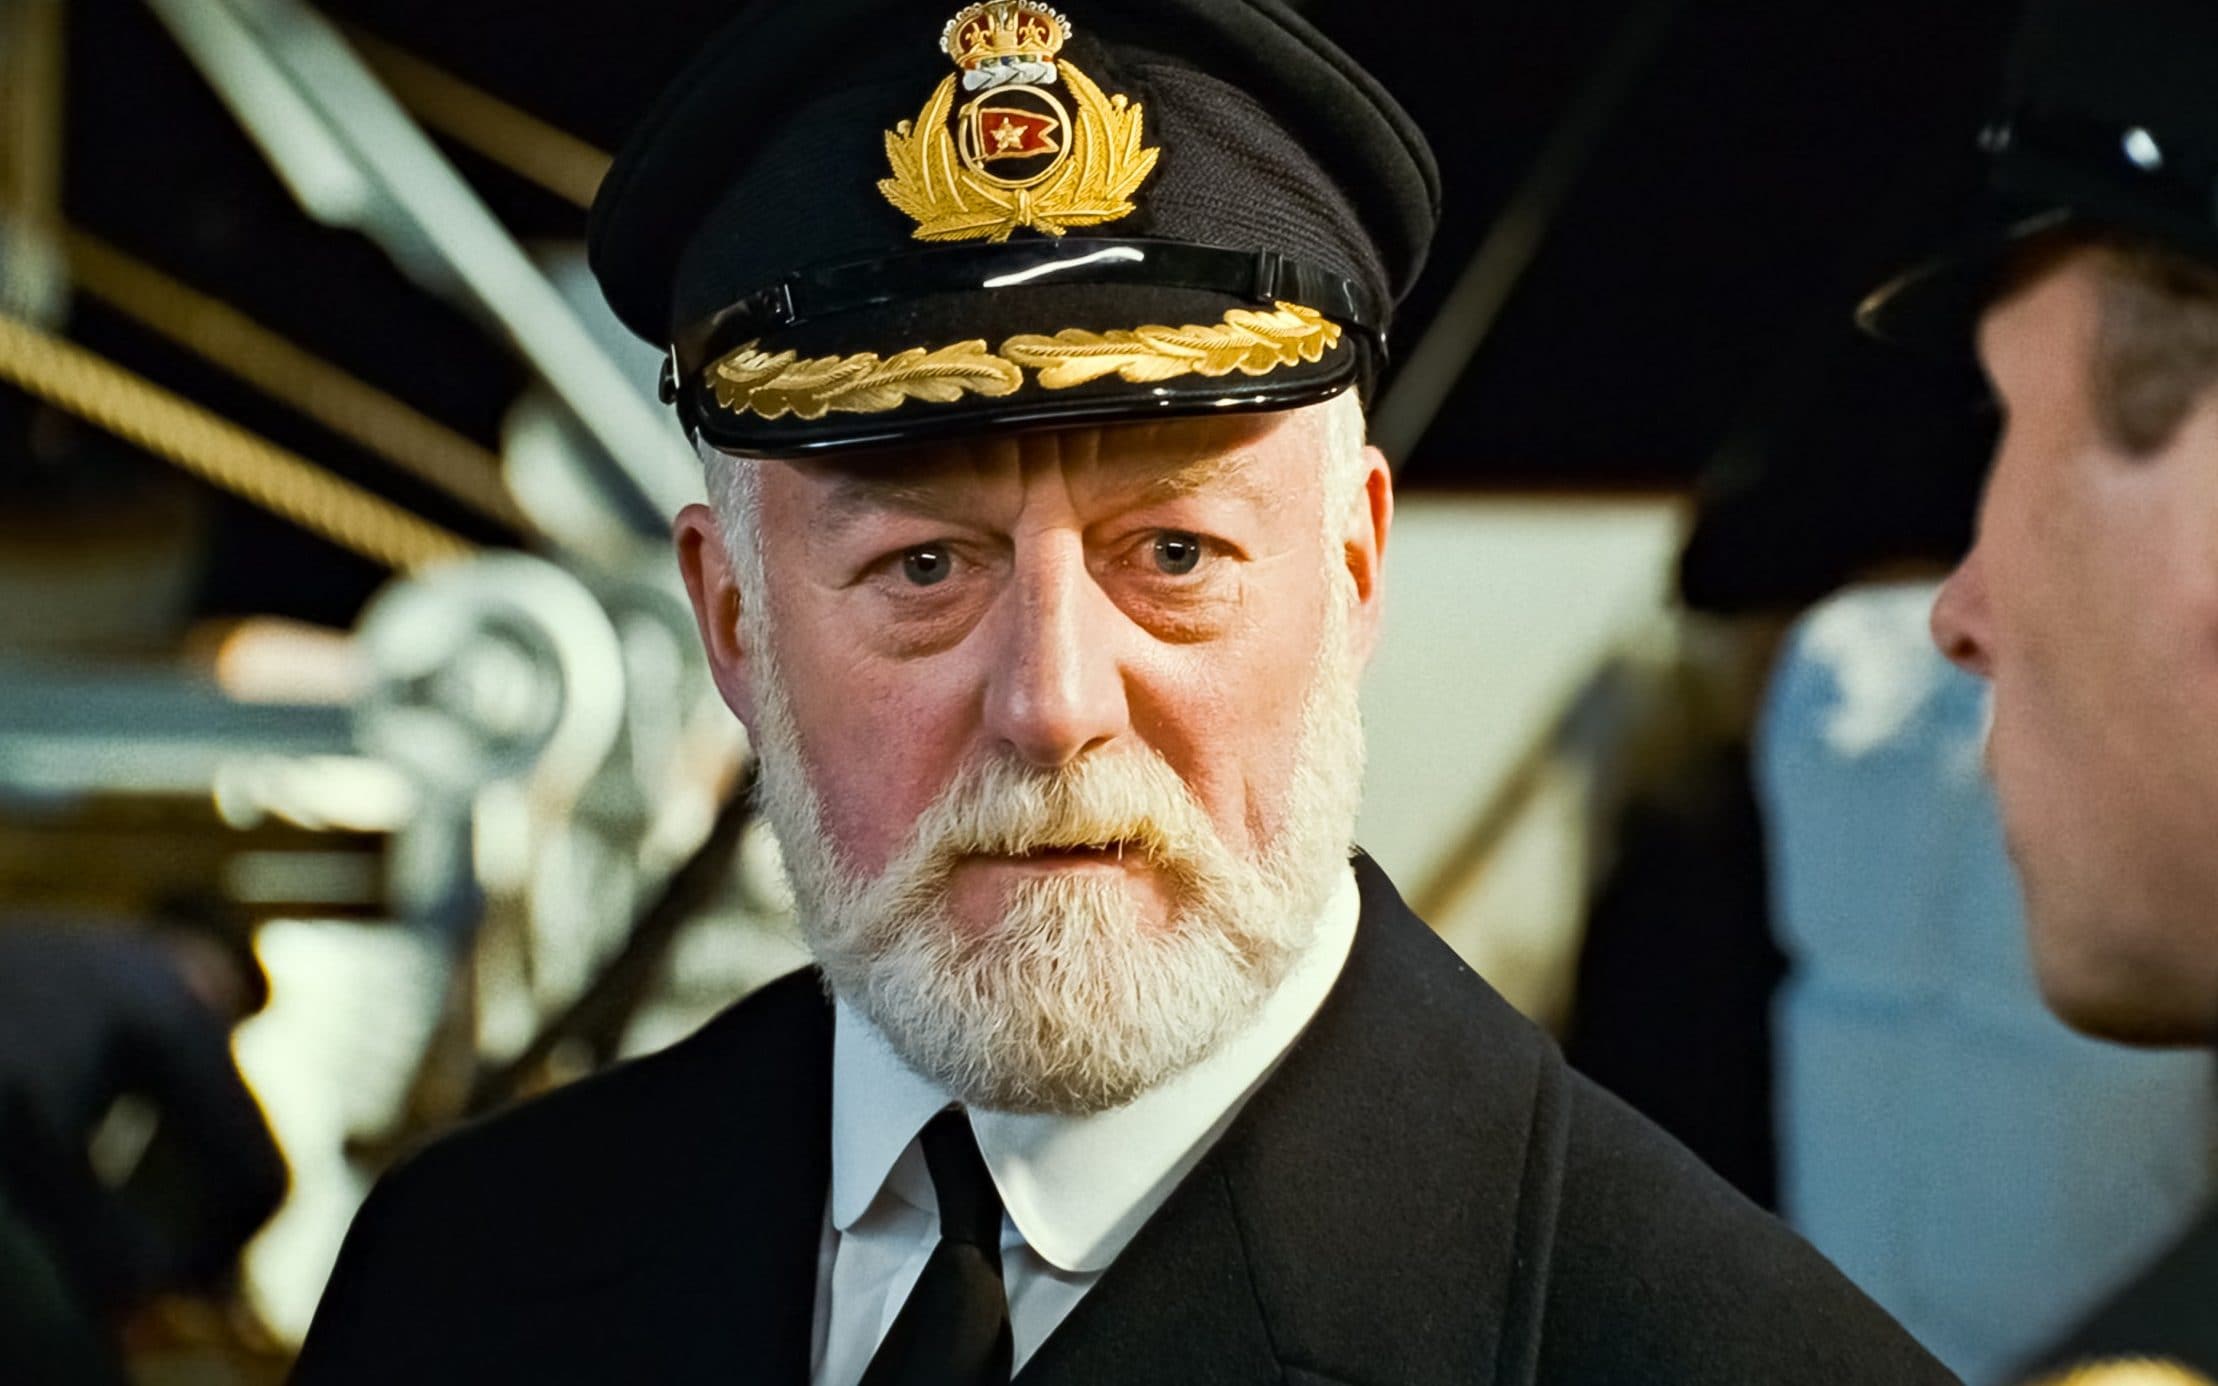 bernard hill’s five greatest roles: from titanic to boys from the blackstuff